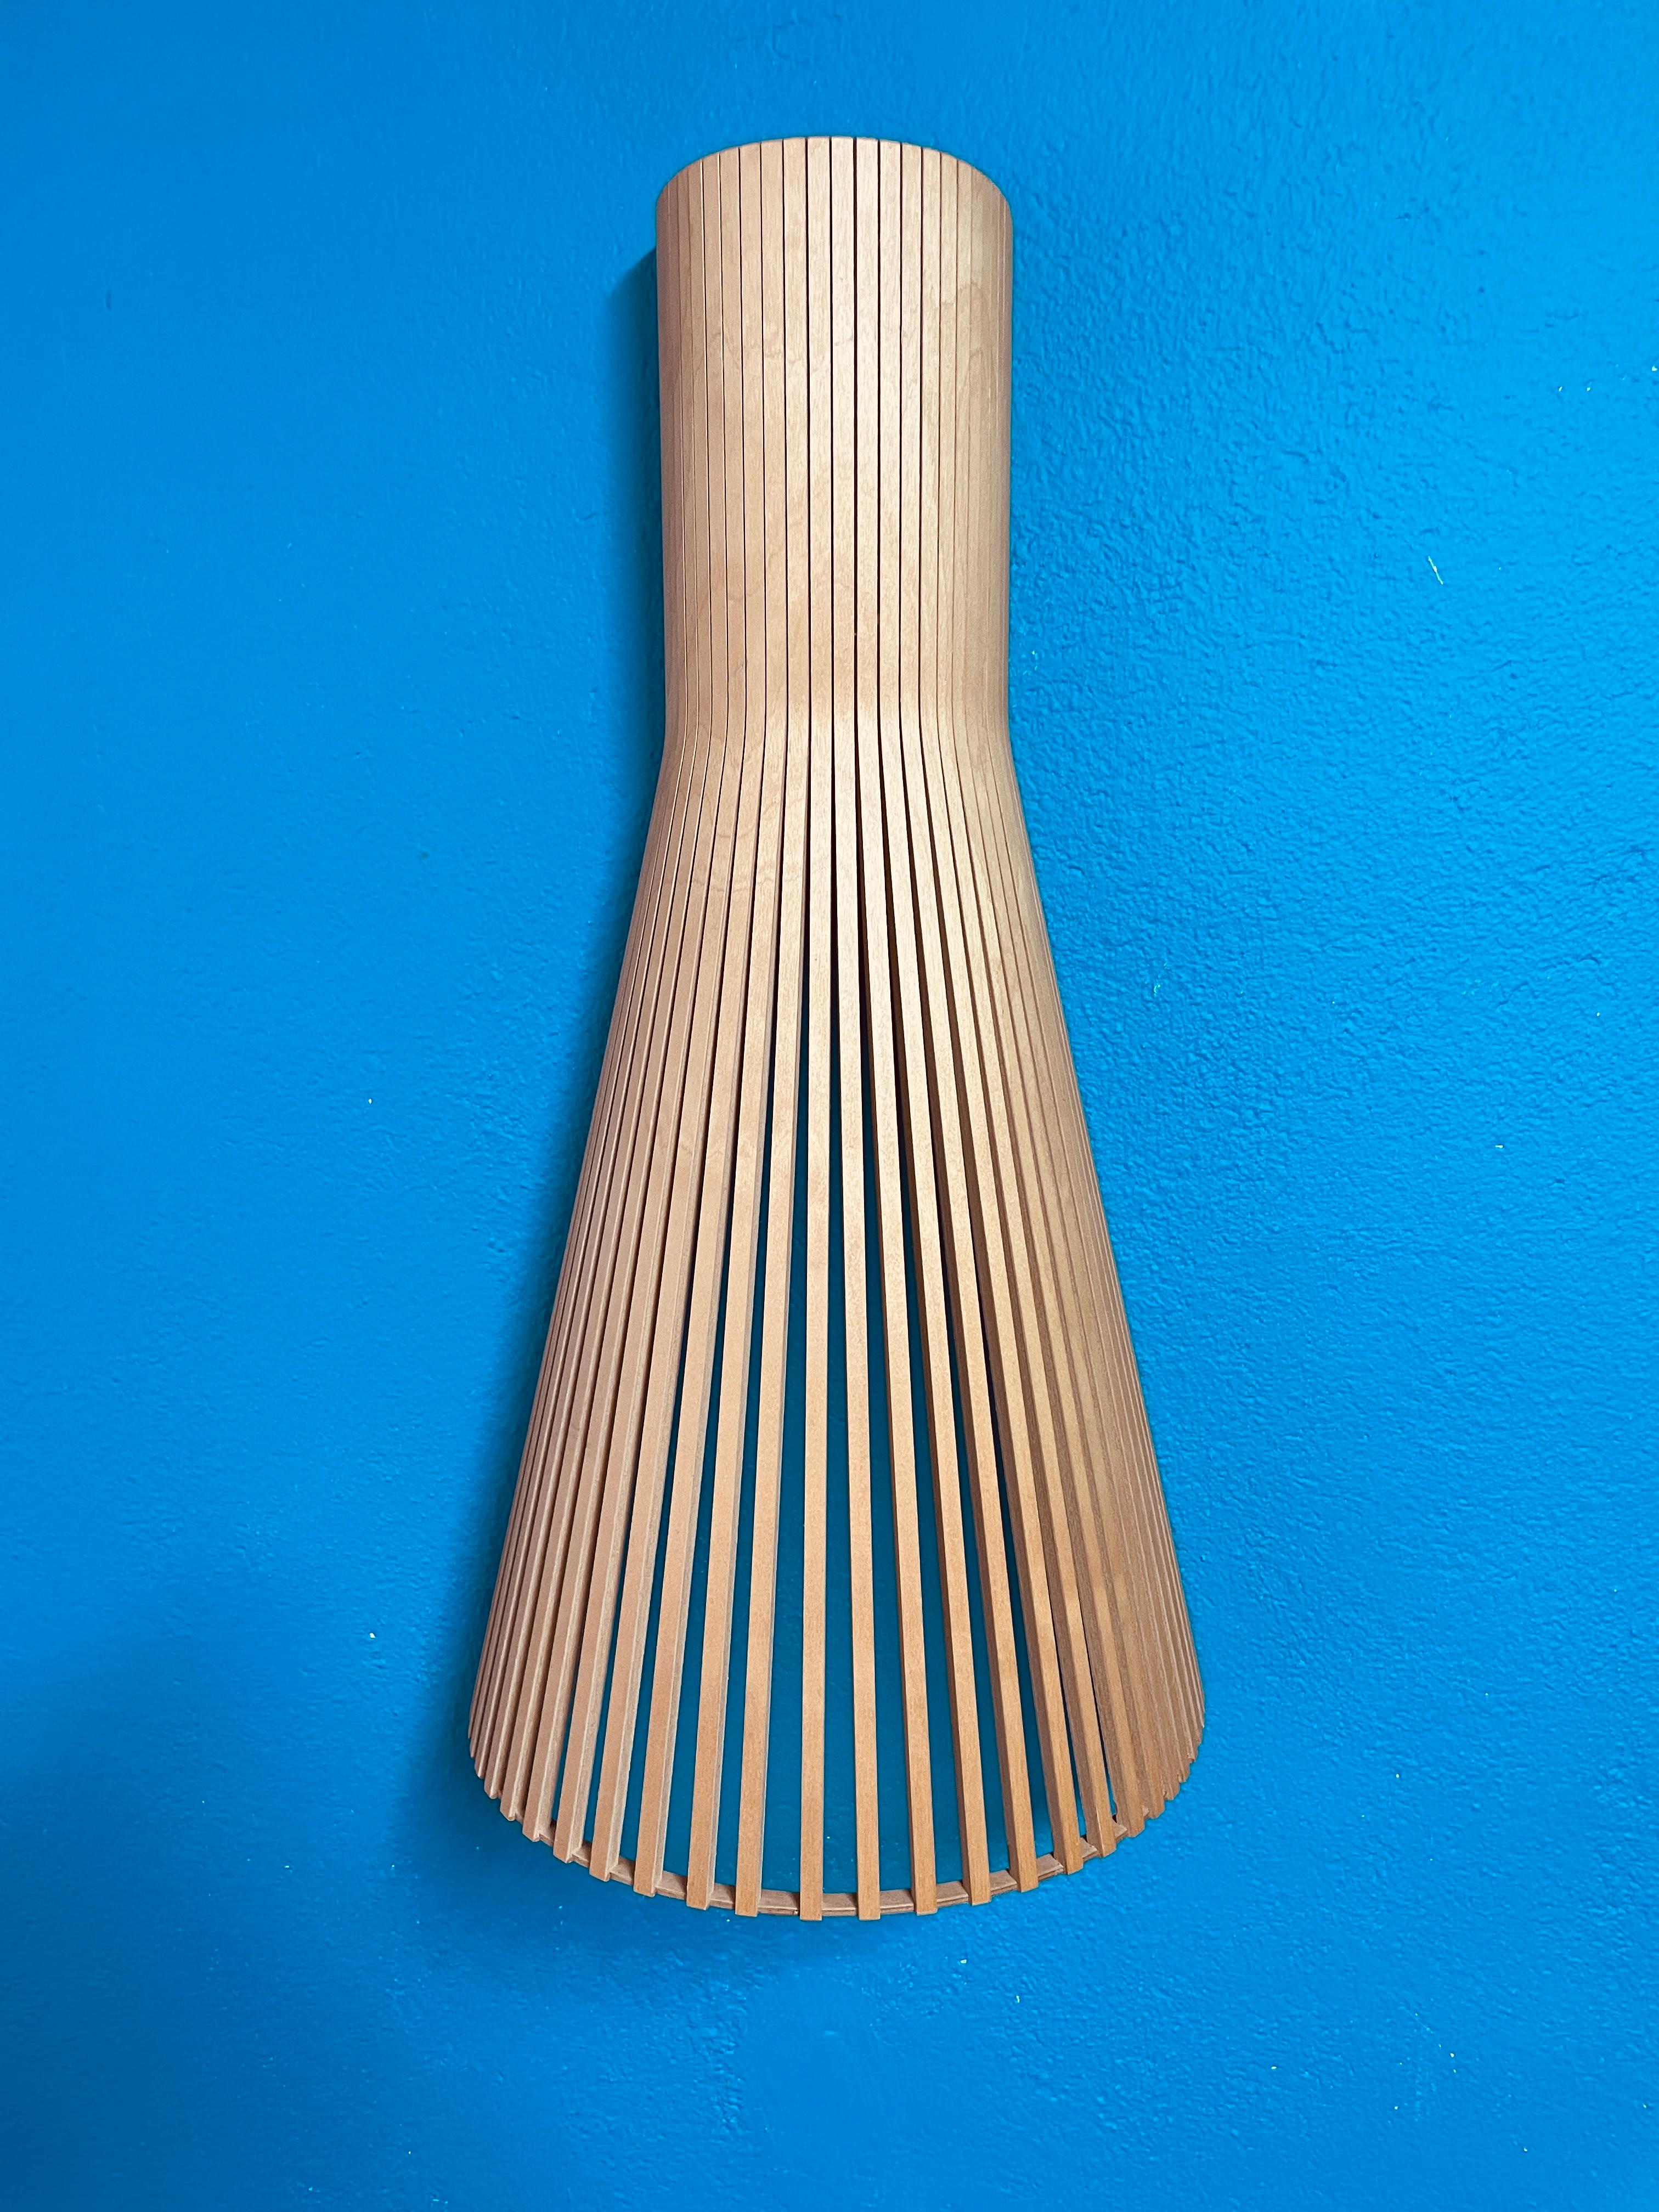 Pair of Wooden Secto 4230 Wall Lamps by Secto Design Finland 1